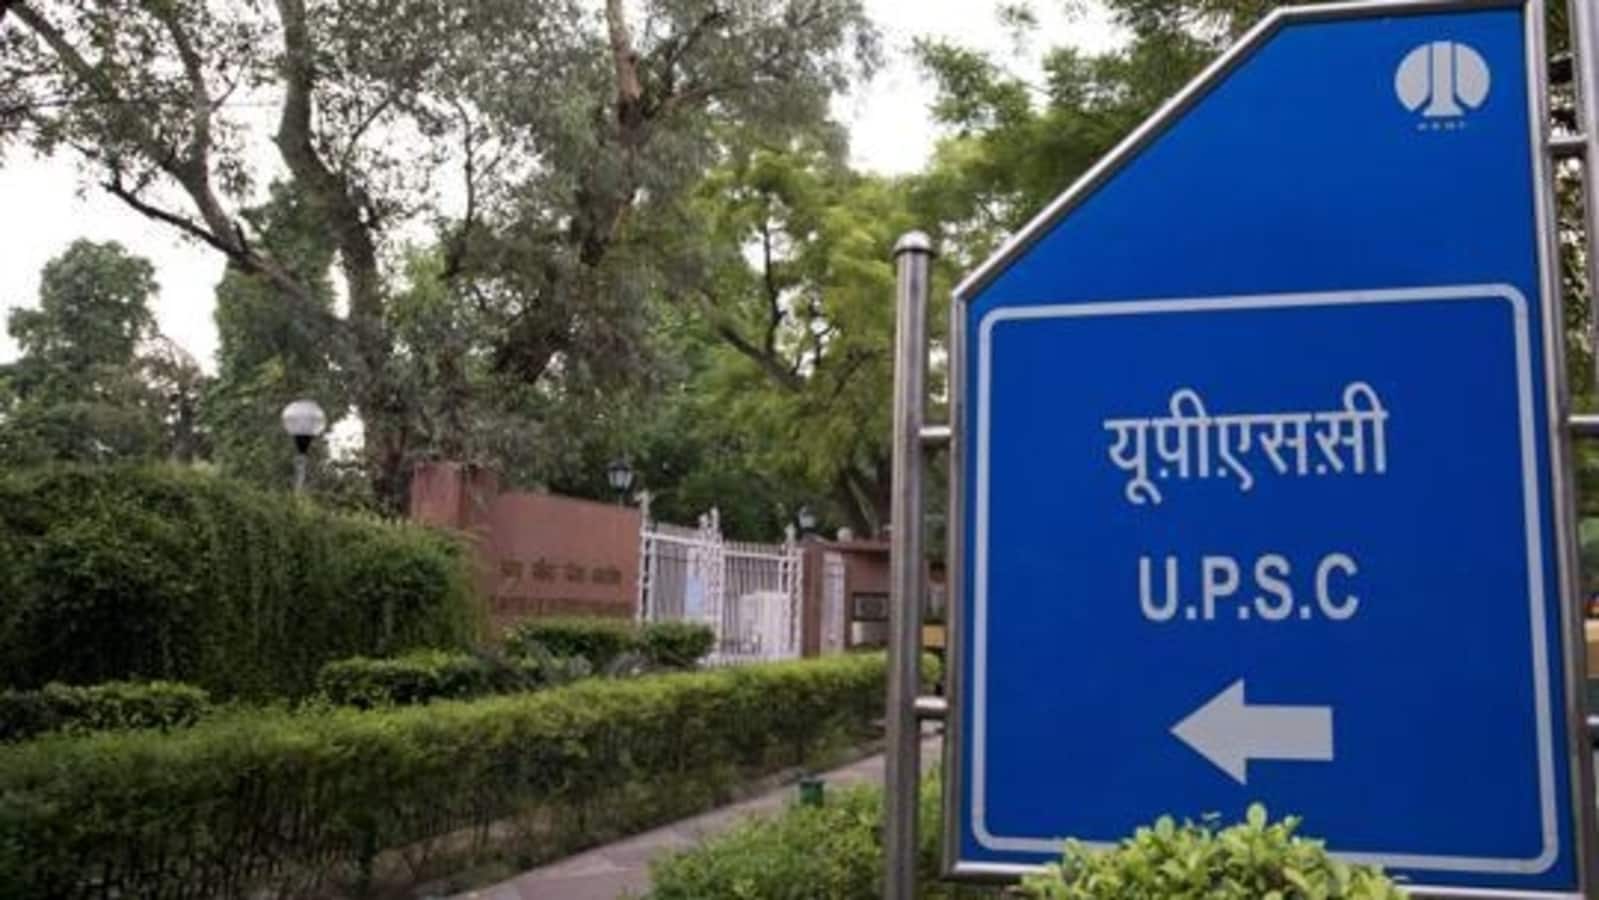 UPSC aspirants hold protest demanding extra attempt to clear exam, citing Covid